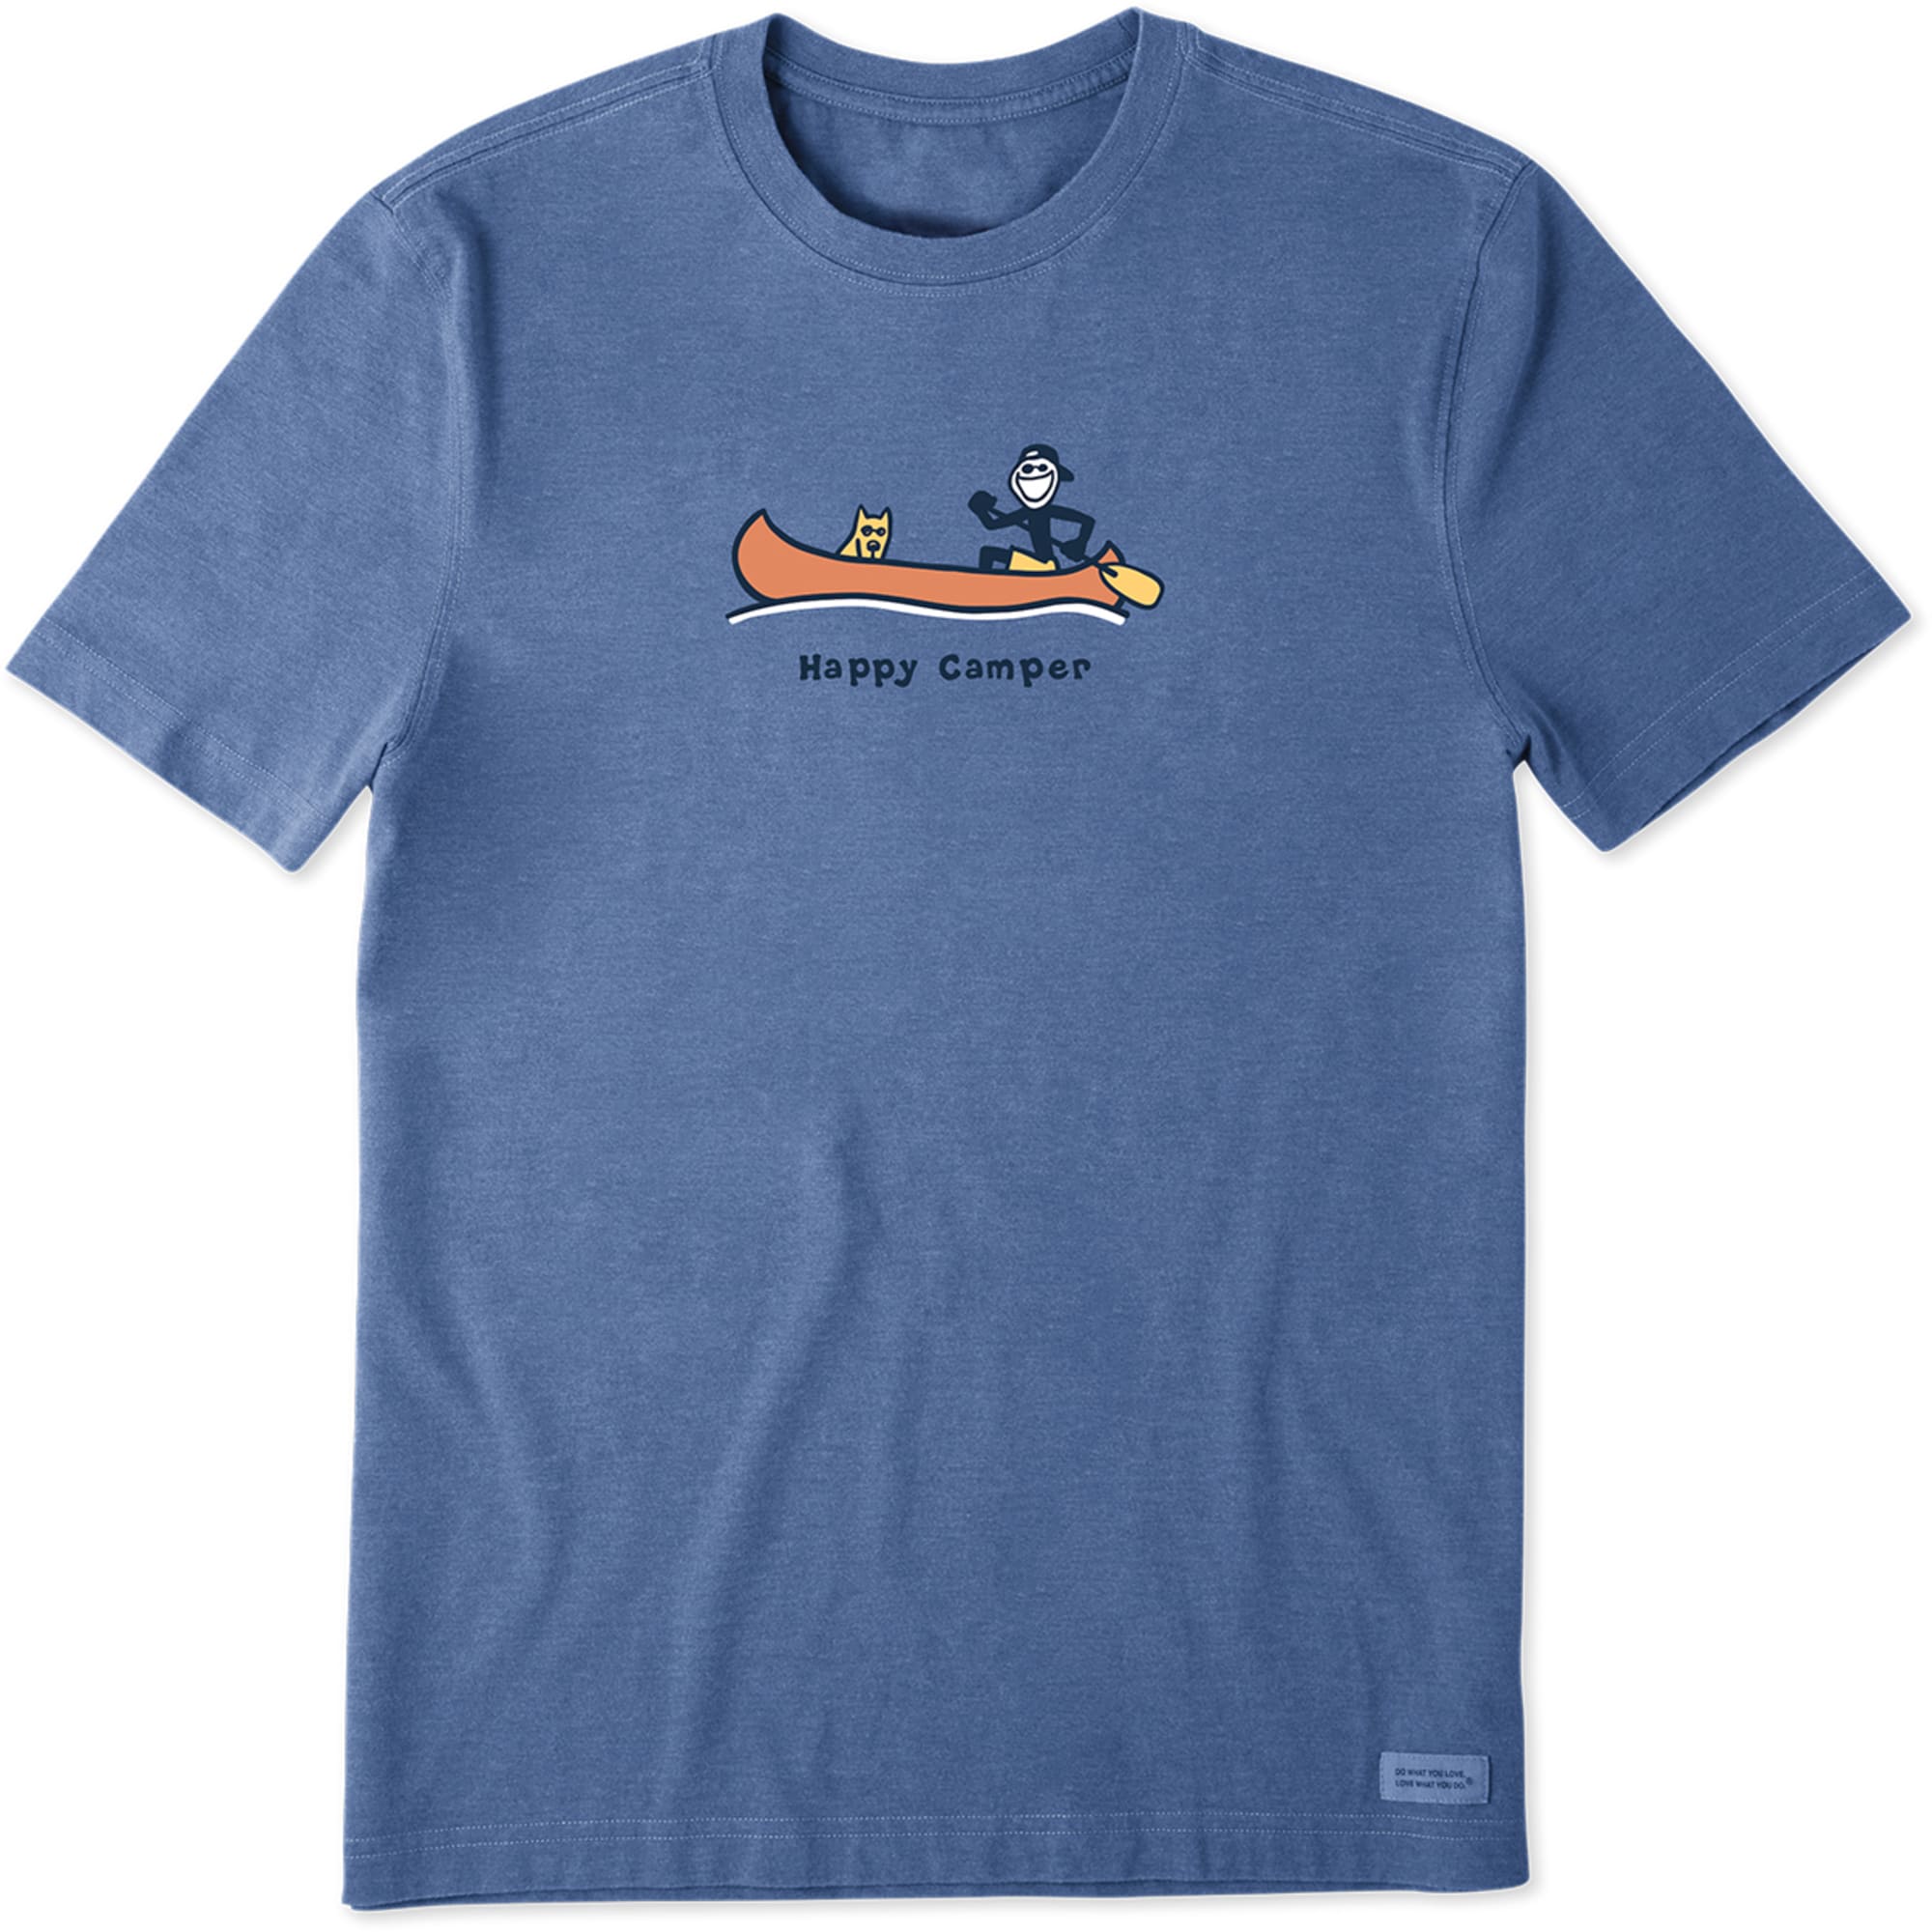 LIFE IS GOOD Men's Vintage Crusher Happy Camper Tee - Eastern Mountain  Sports